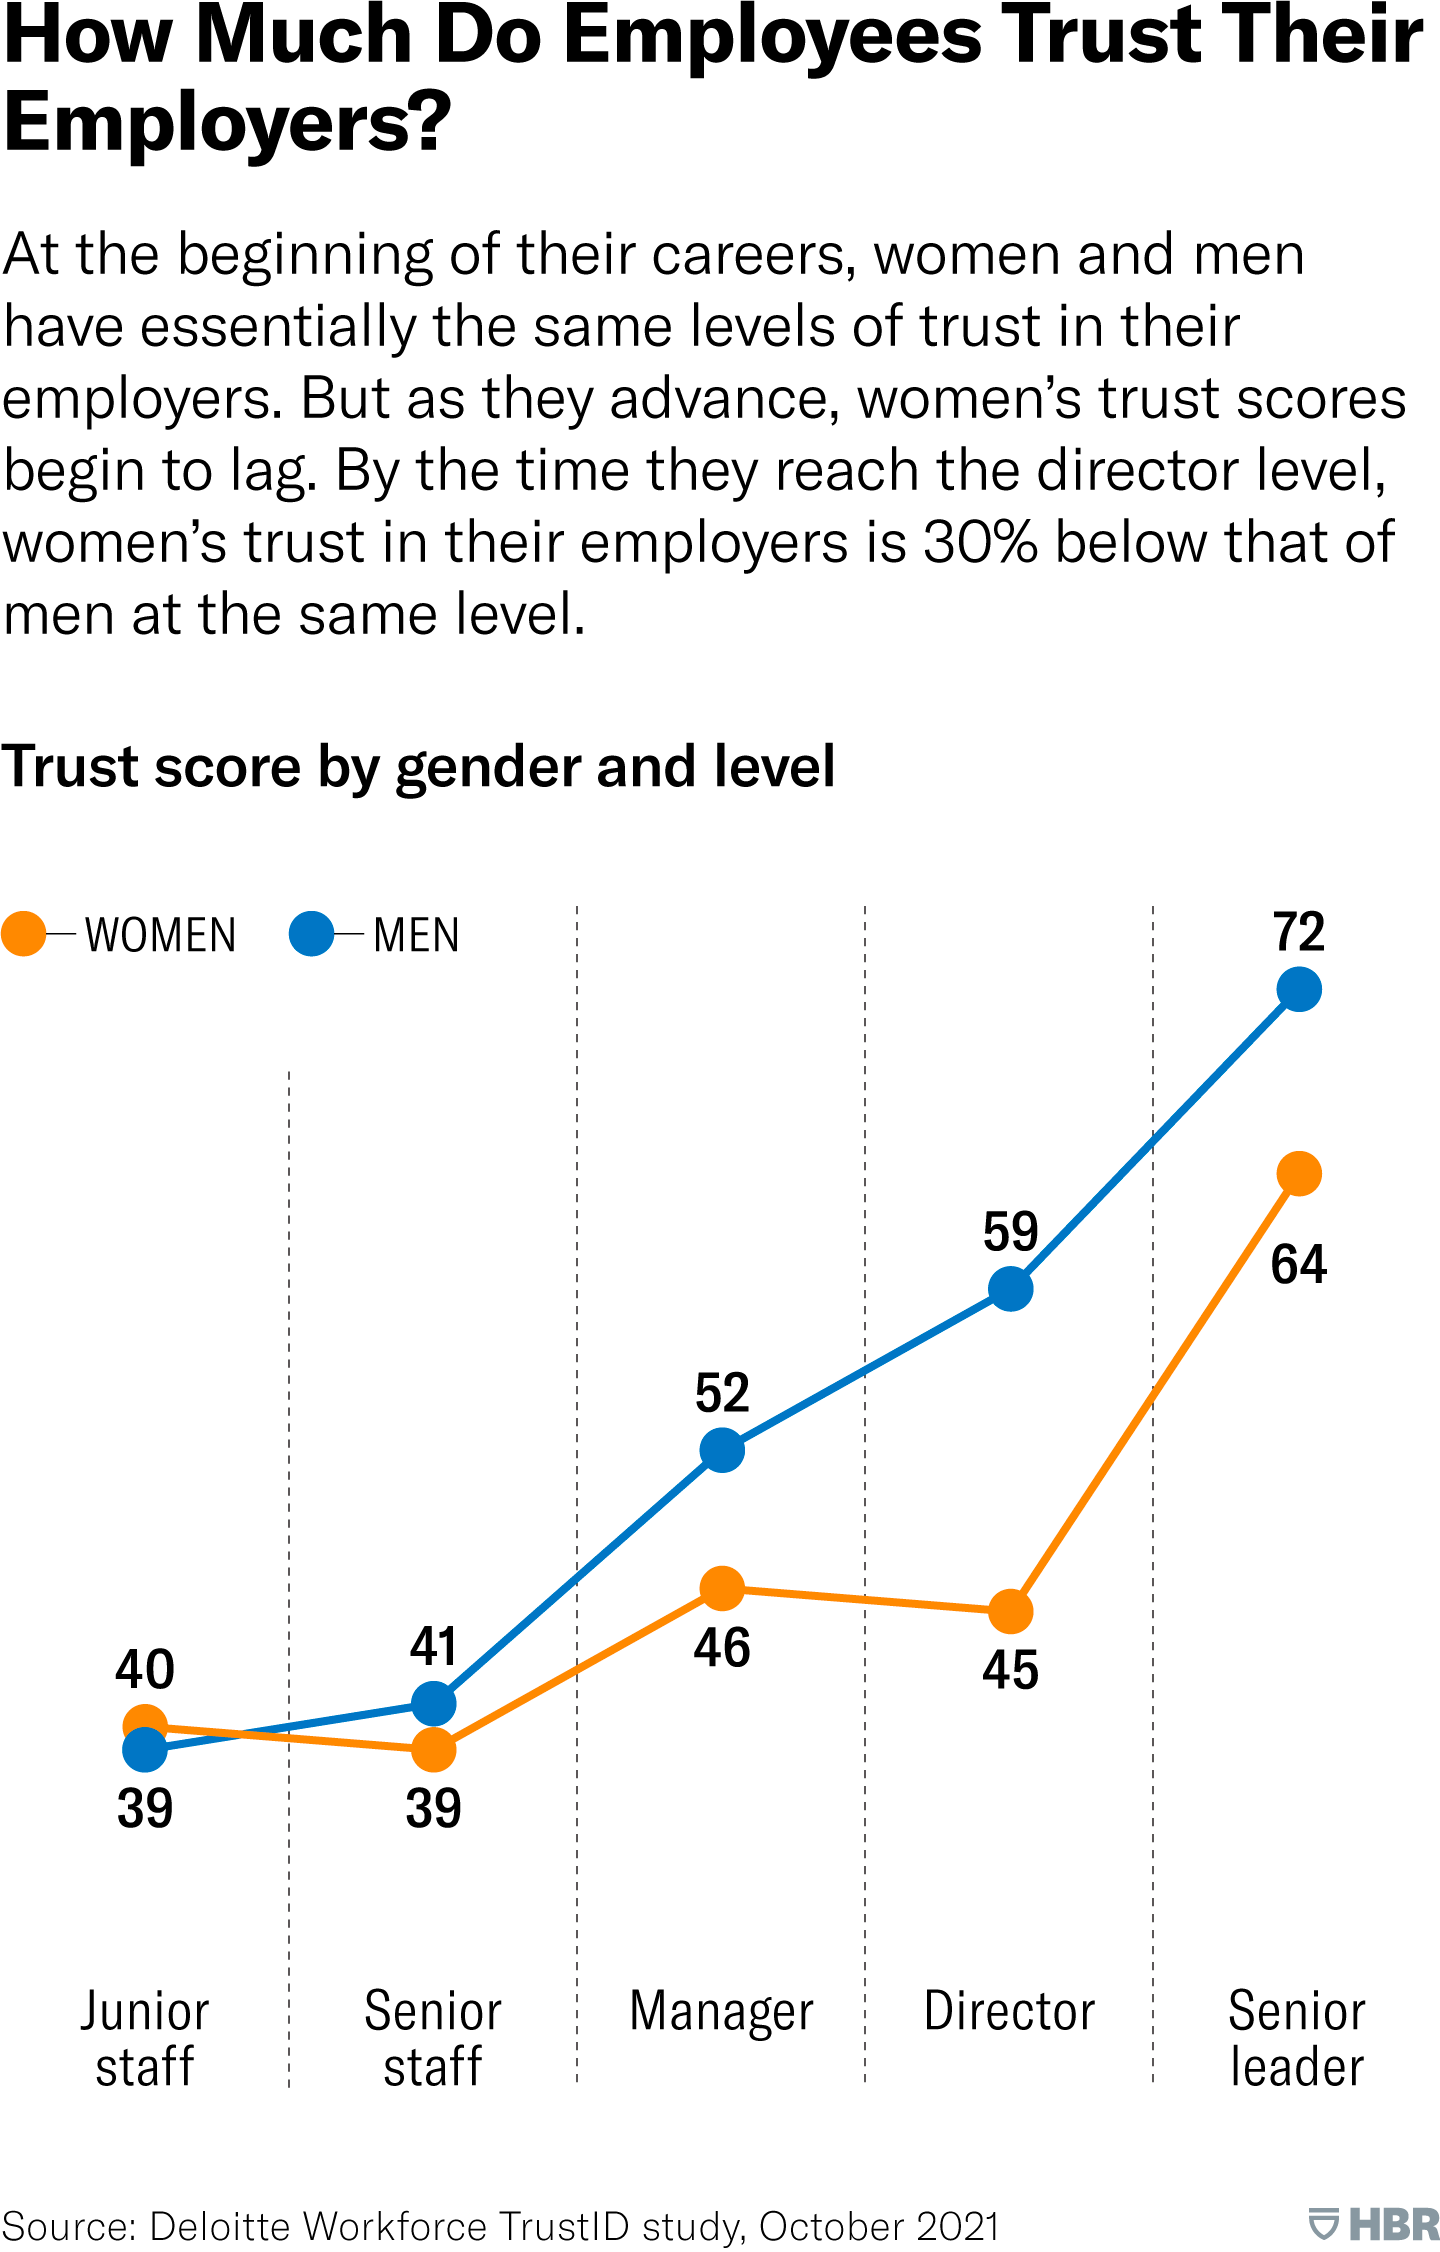 How Much Do Employees Trust Their Employers? At the beginning of their careers, women and men have essentially the same levels of trust in their employers. But as they advance, women’s trust scores begin to lag. This line graph shows trust scores by level and gender. While the scores start close together, at 39 for men and 40 for women as junior staff, the lines diverge significantly by manager level, and by the time employees reach director level, women’s trust in their employers is 30% below that of men at the same level. The gap narrows again as men and women become senior leaders. Source: Deloitte Workforce TrustID study, October 2021